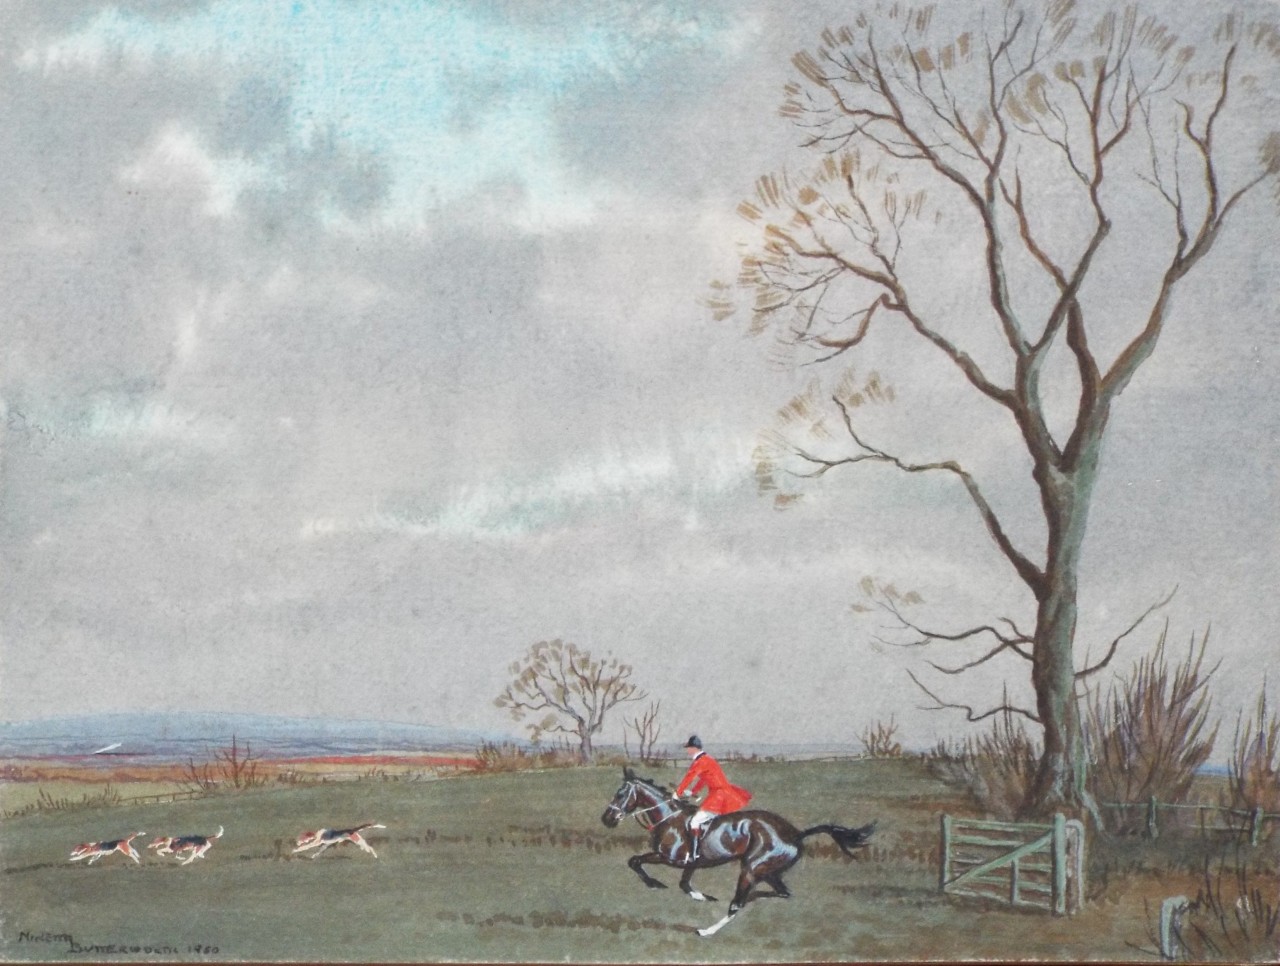 Oil on boads - Huntsman at the gallop with hounds